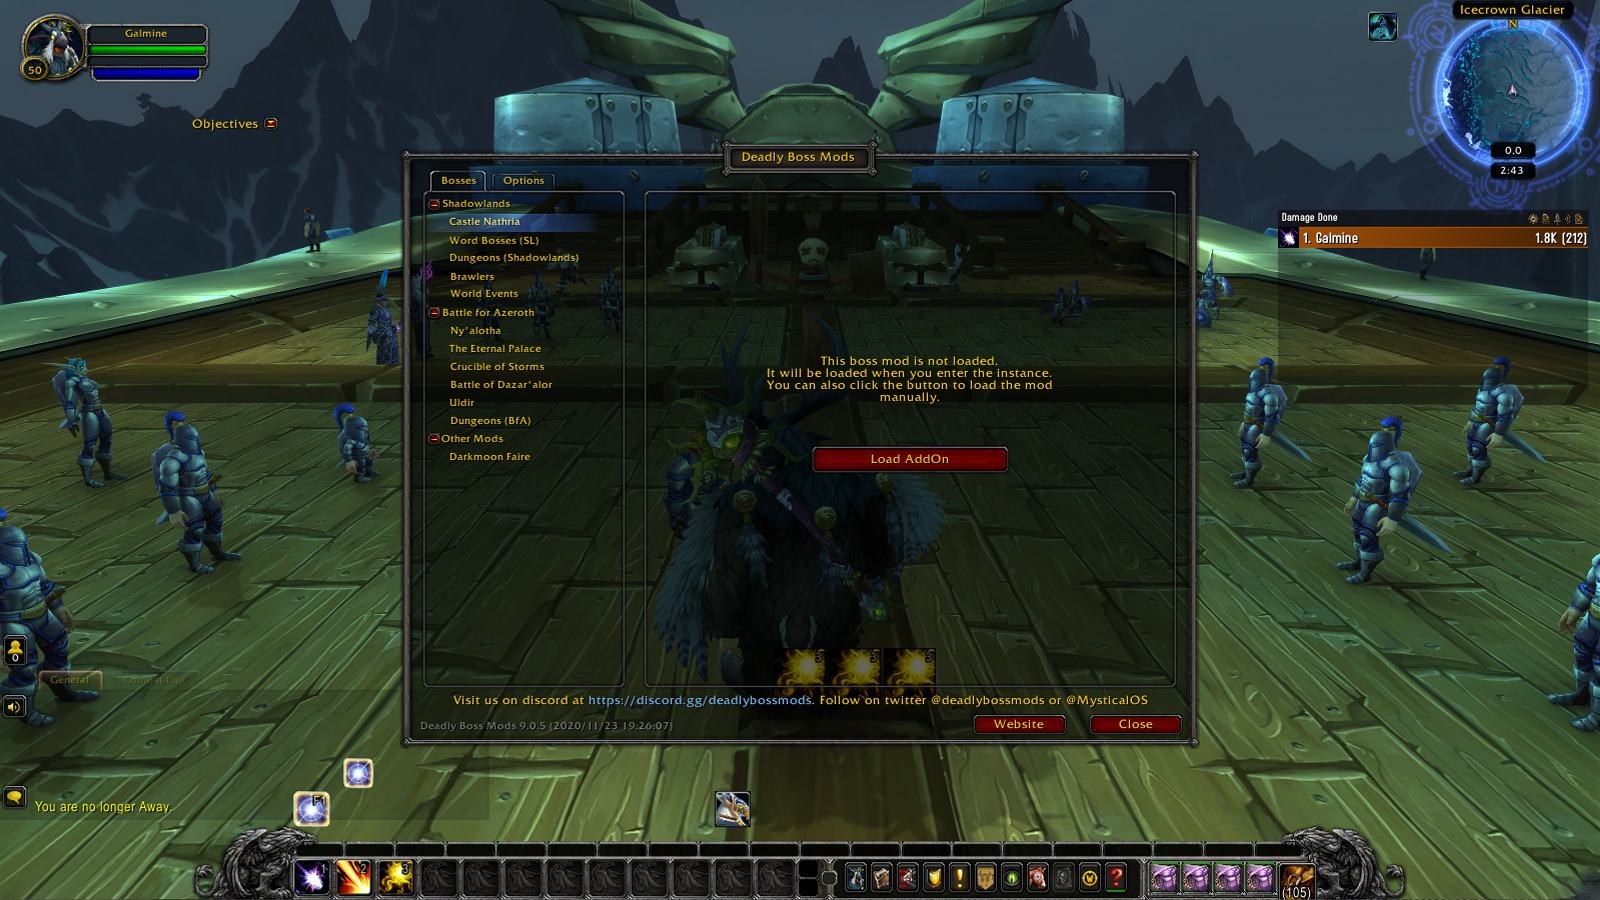 Deadly Boss Mods User Interface Panel in World of Warcraft gezeigt